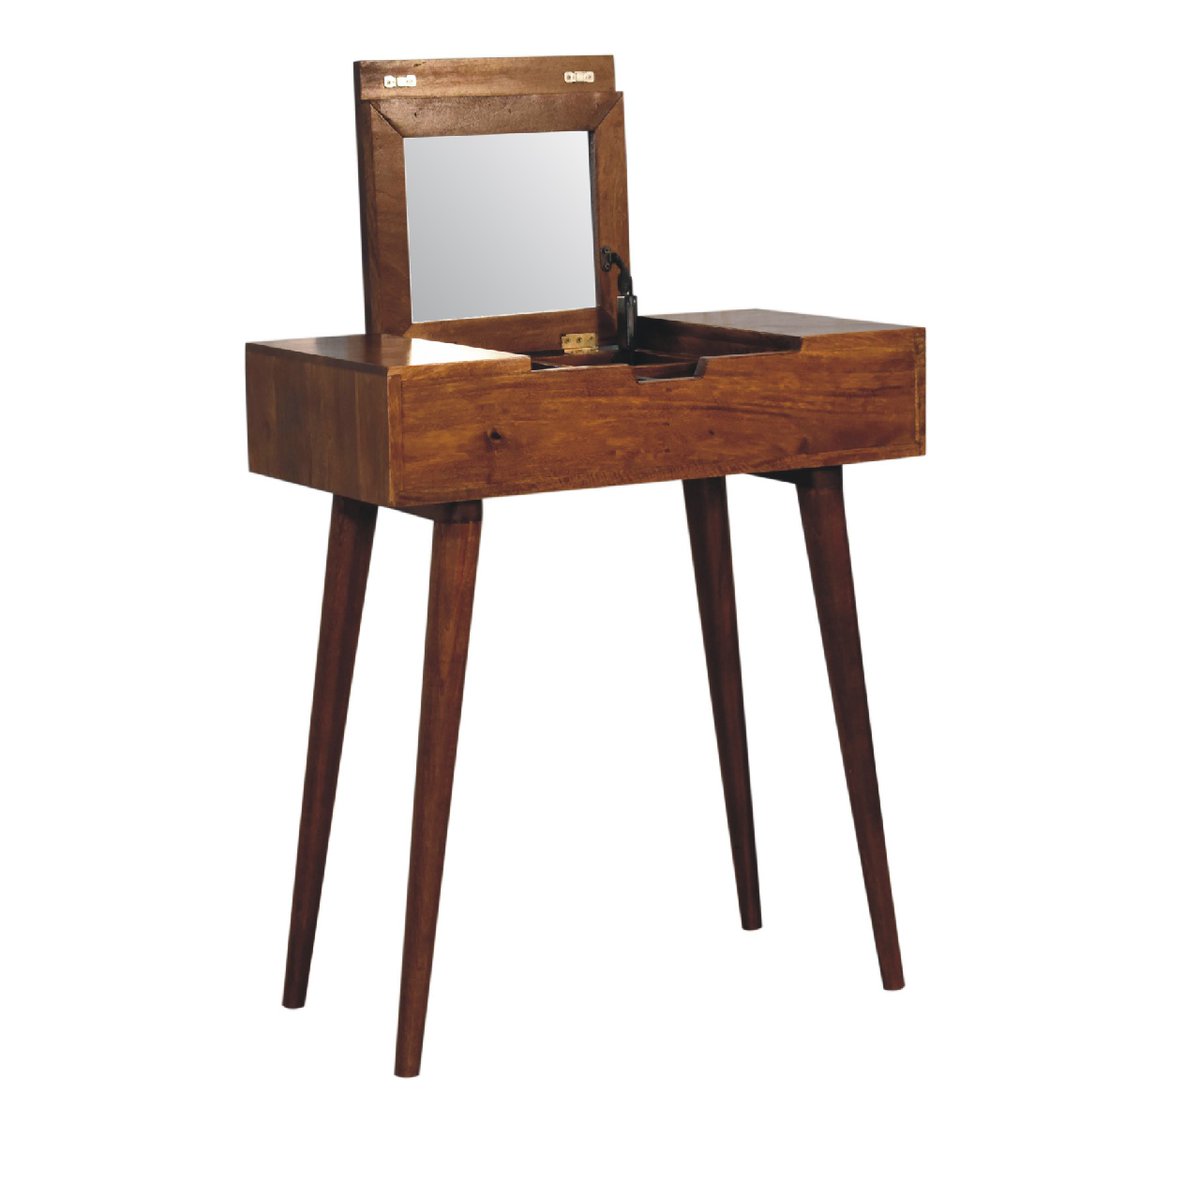 Mini Chestnut Dressing Table with Foldable Mirror

Constructed from 100% solid mango wood in a chestnut finish with 1 drawer, it features a foldable mirror and storage compartments for storing any bits and pieces. 

#dressingtable #solidwood #mangowood #artisan #furniture #b2b